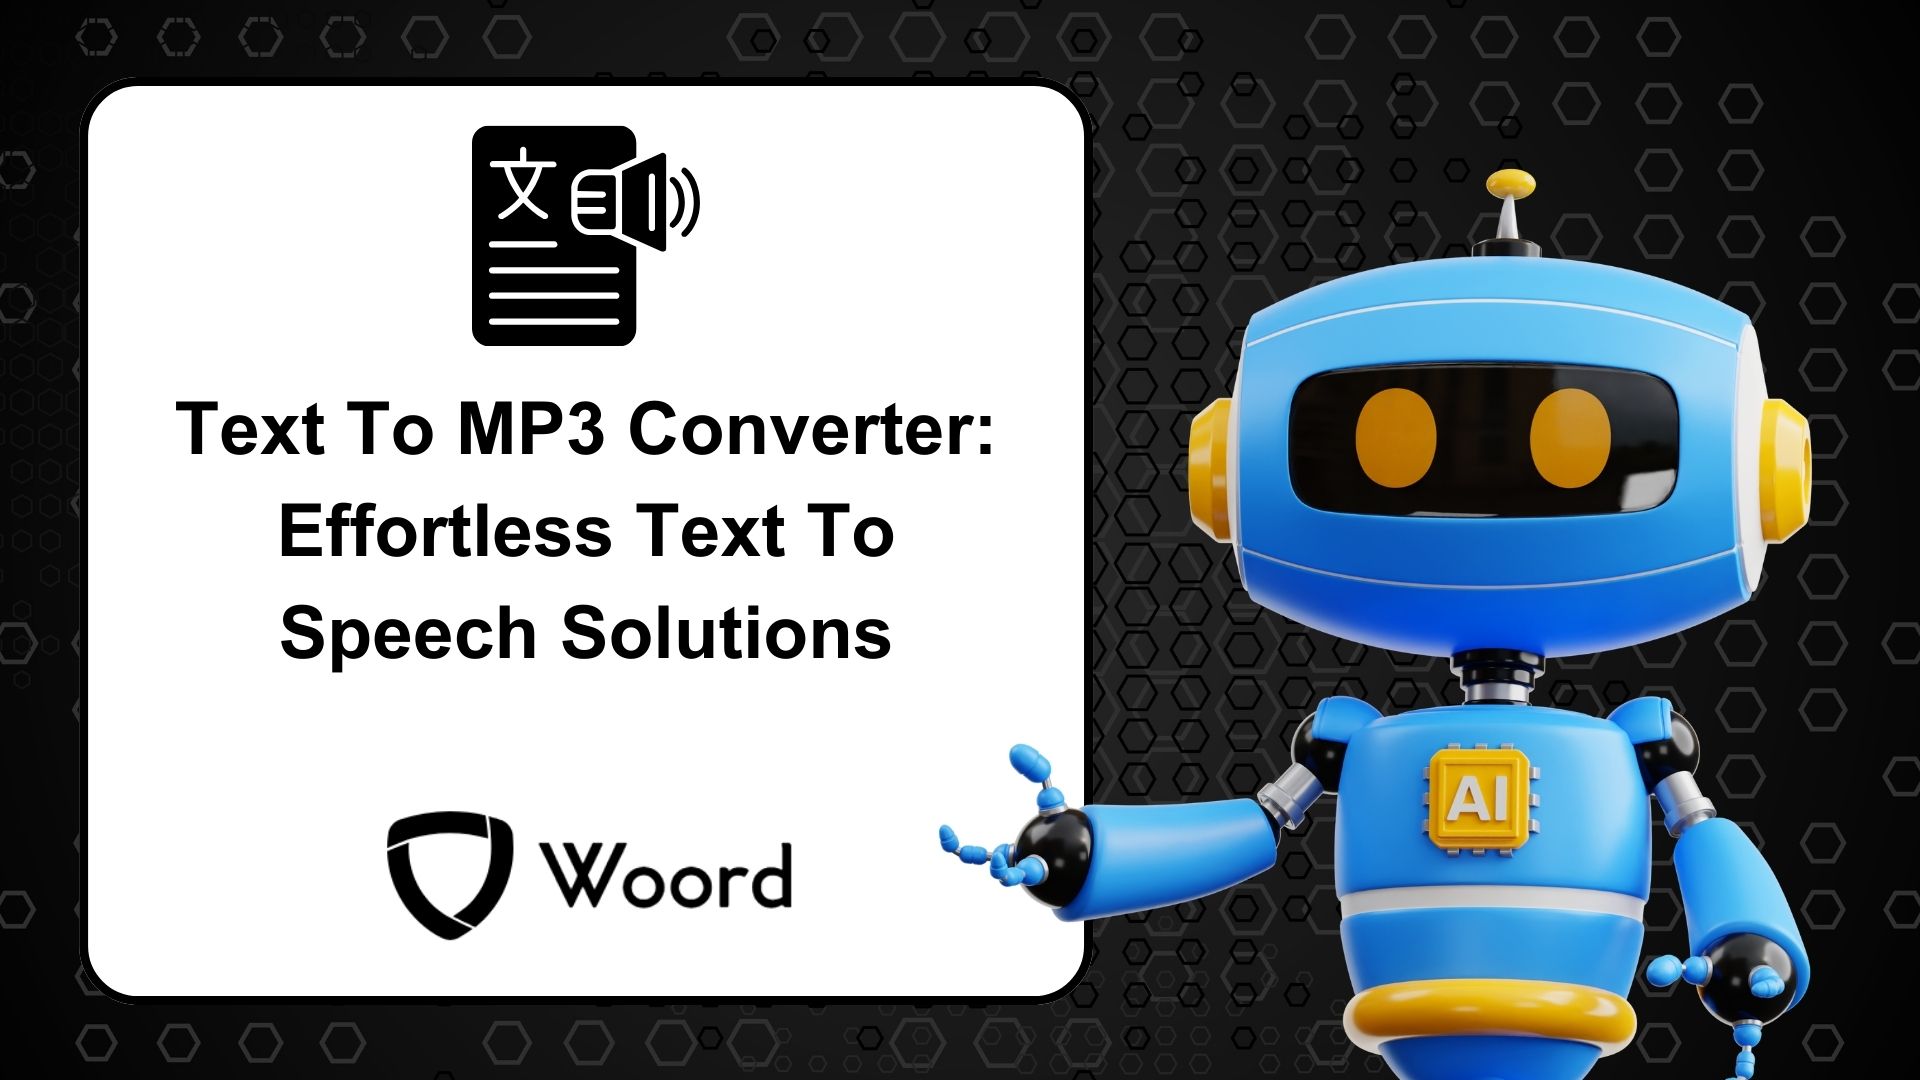 Text To MP3 Converter: Effortless Text To Speech Solutions